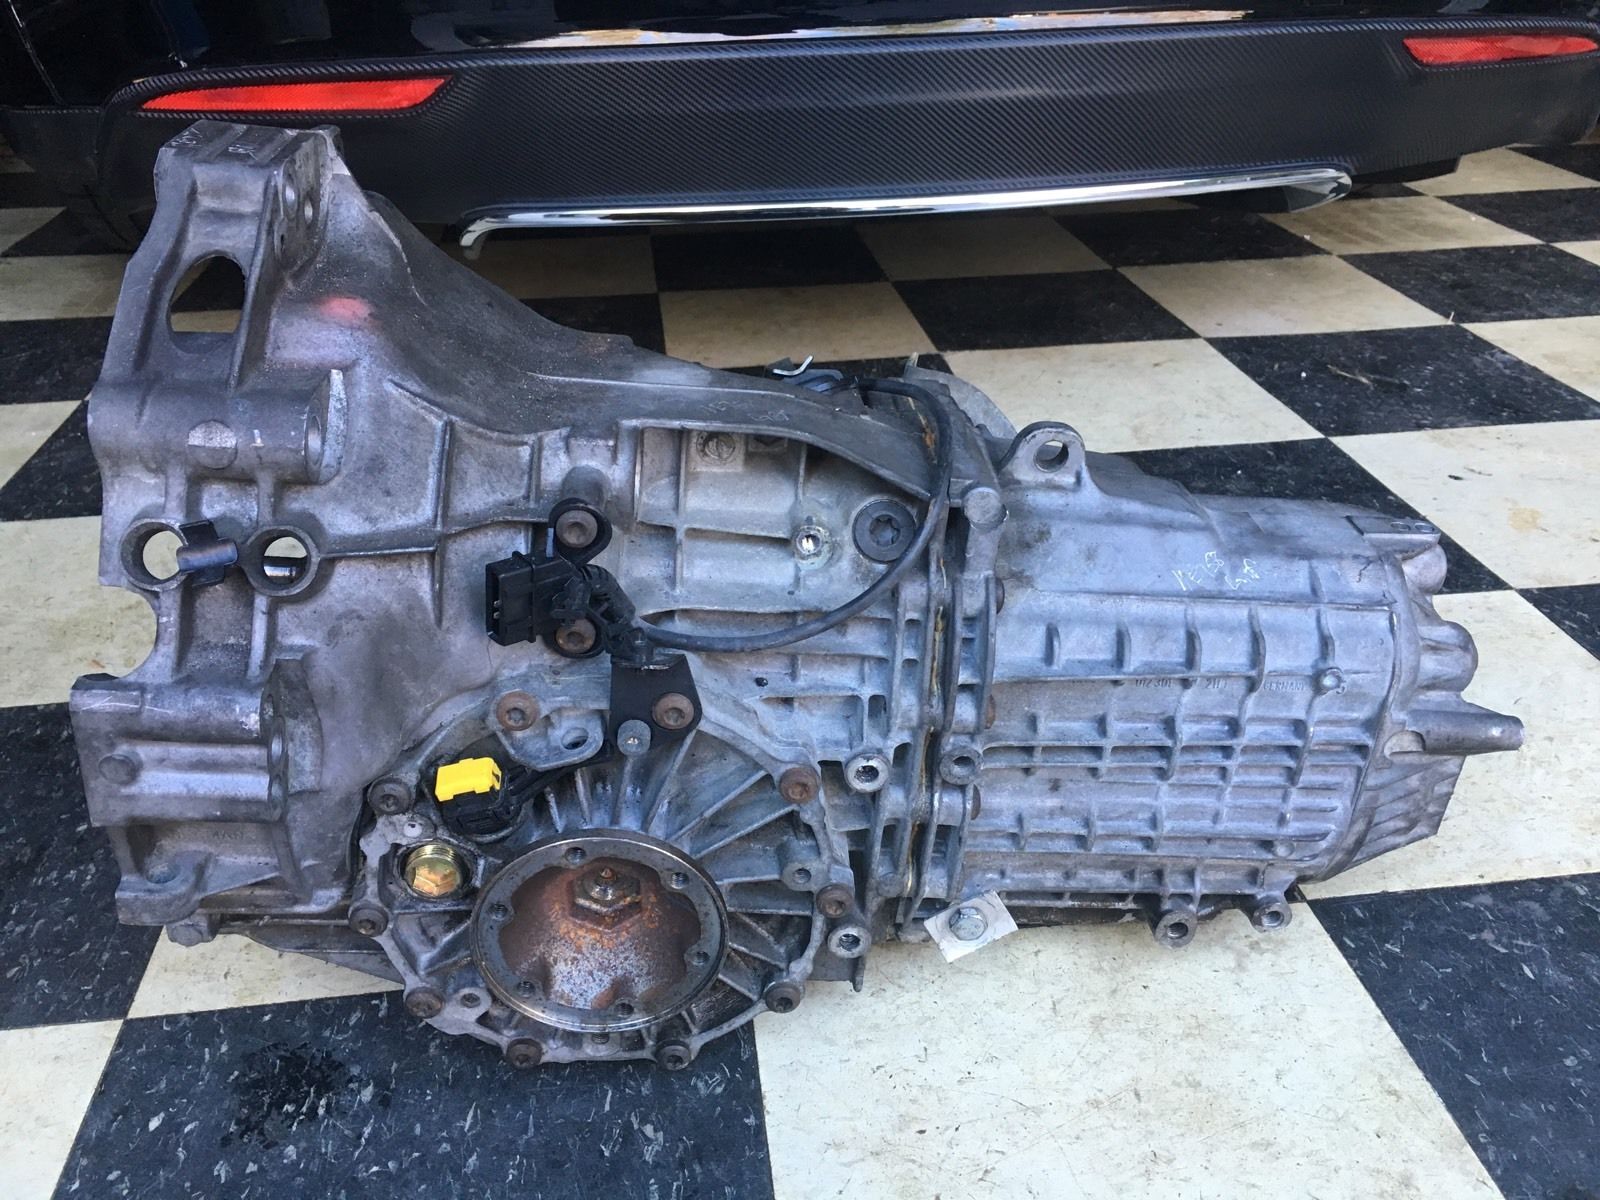 Porsche boxster 986 5speed manual transmission. Opened